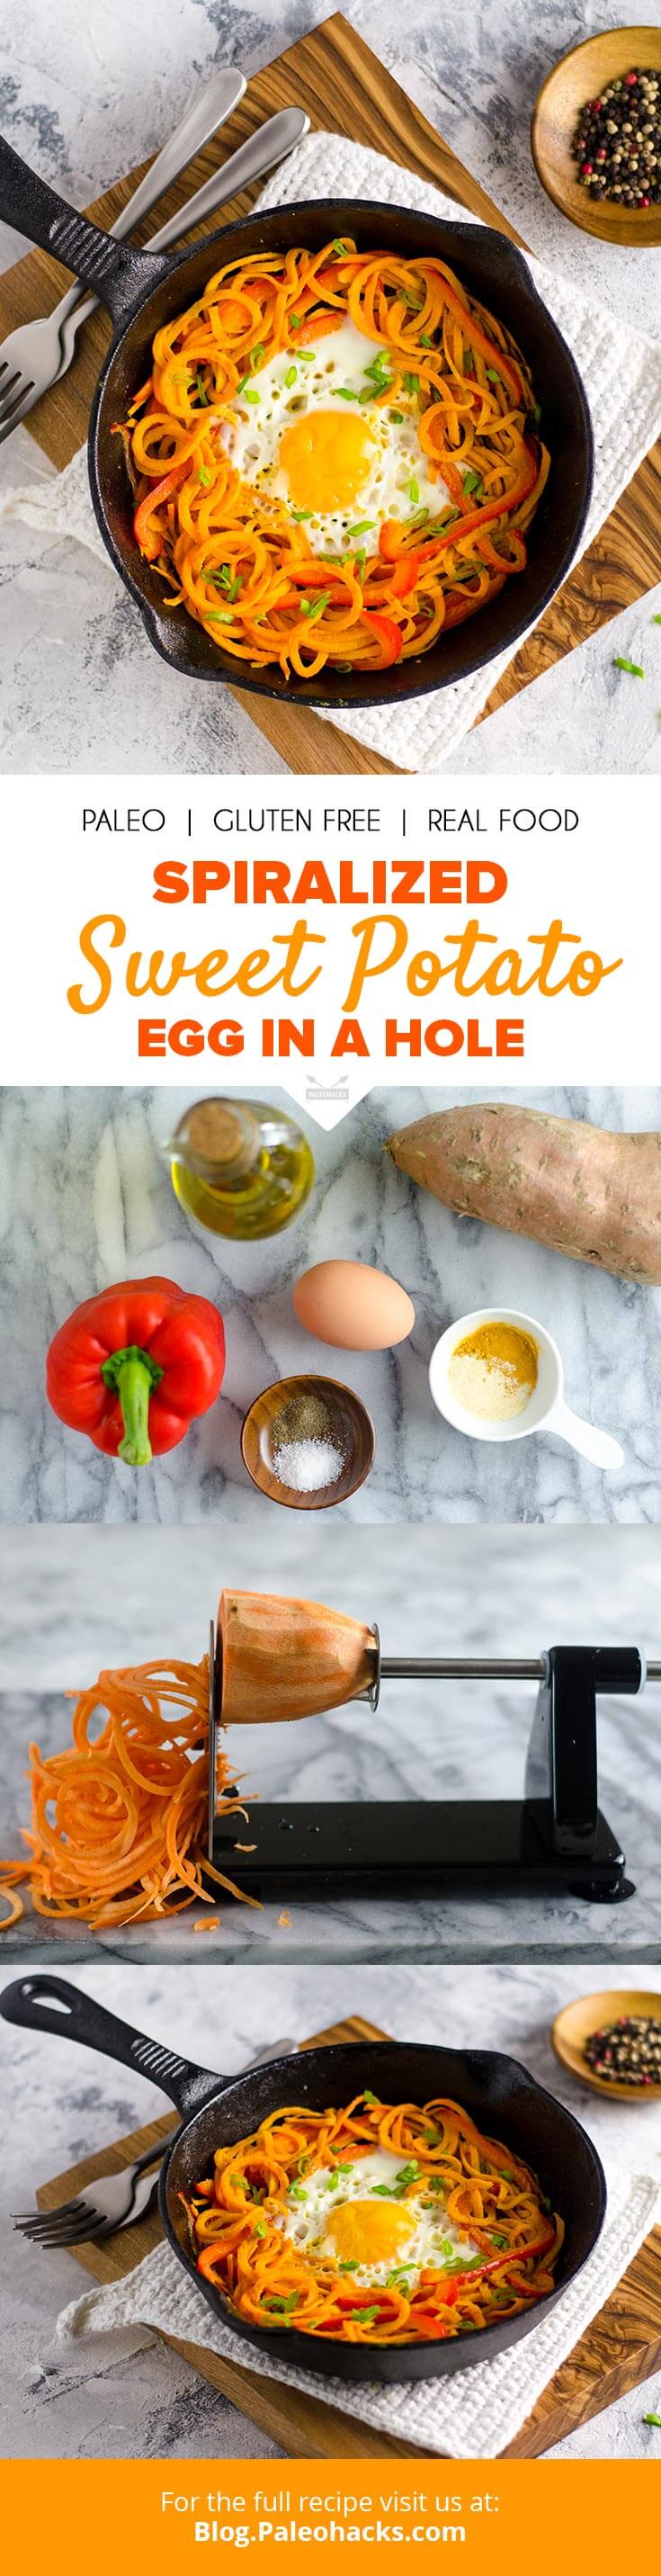 Sweet, savory, and aromatic, this super quick and easy sweet potato egg in a hole makes the perfect filling and nutritious breakfast.